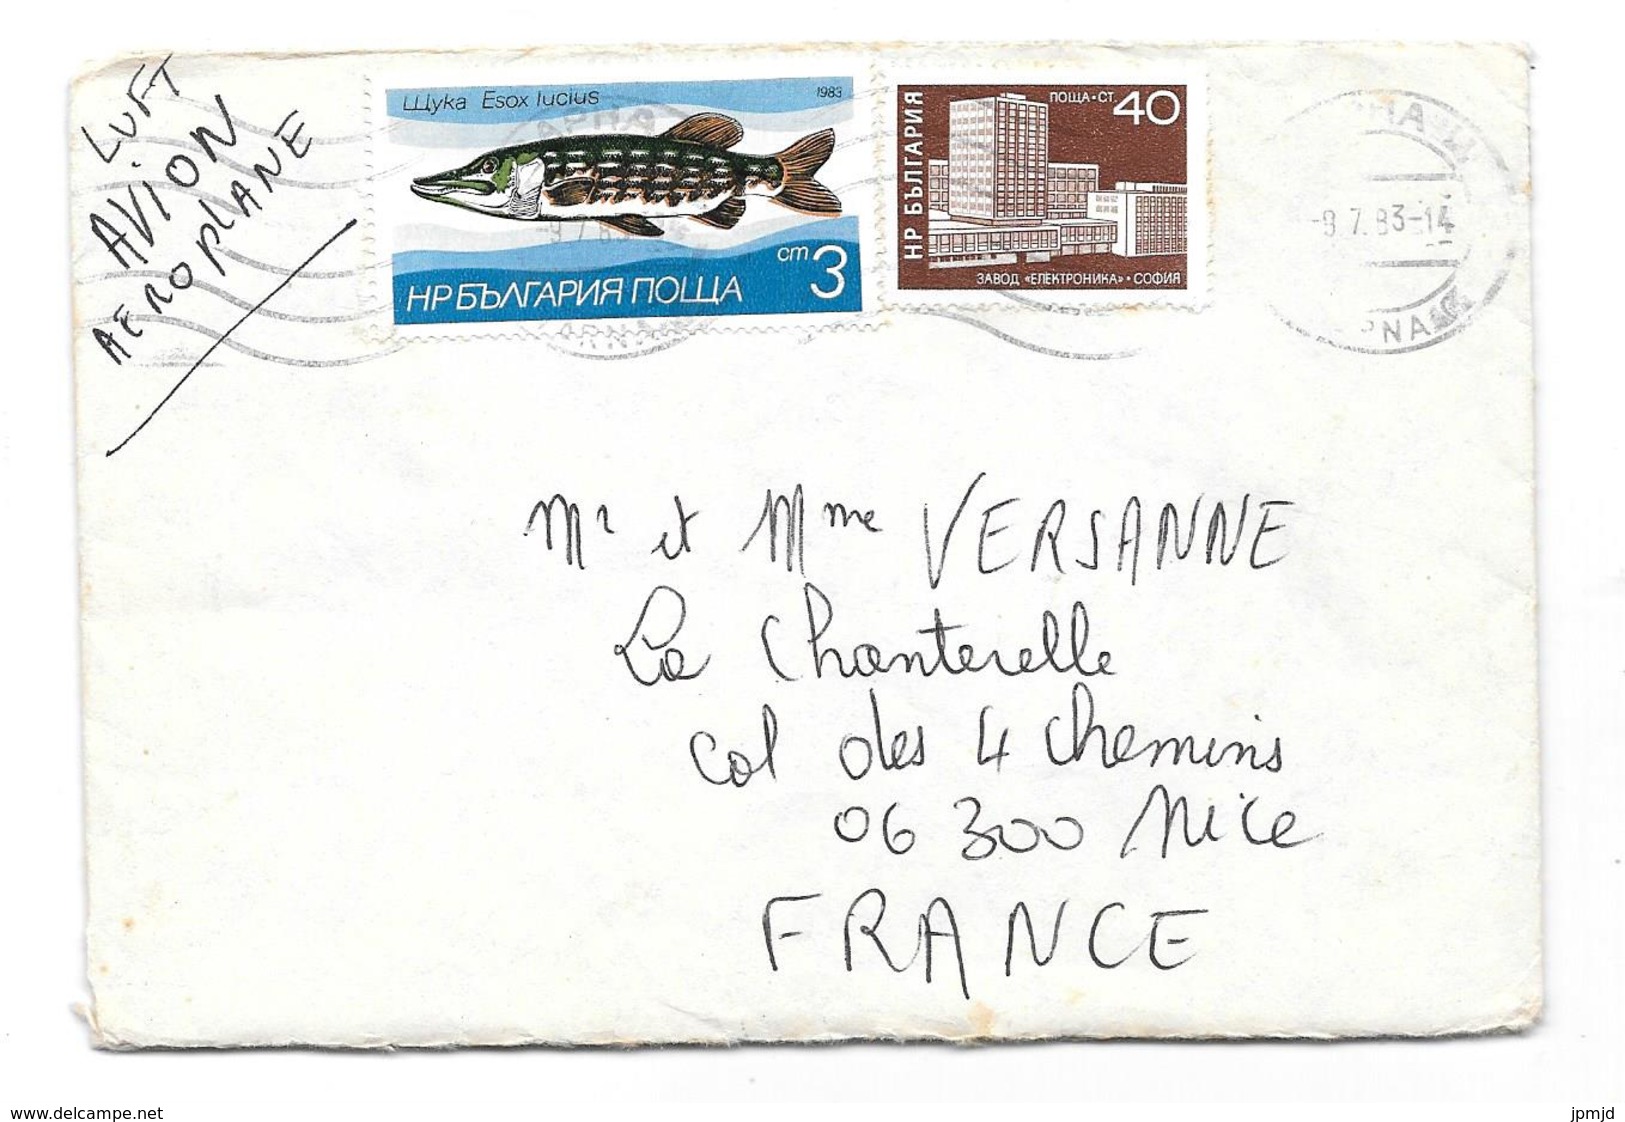 From BULGARIA To FRANCE - PAR AVION - Mailed Cover 1983 - Lettres & Documents